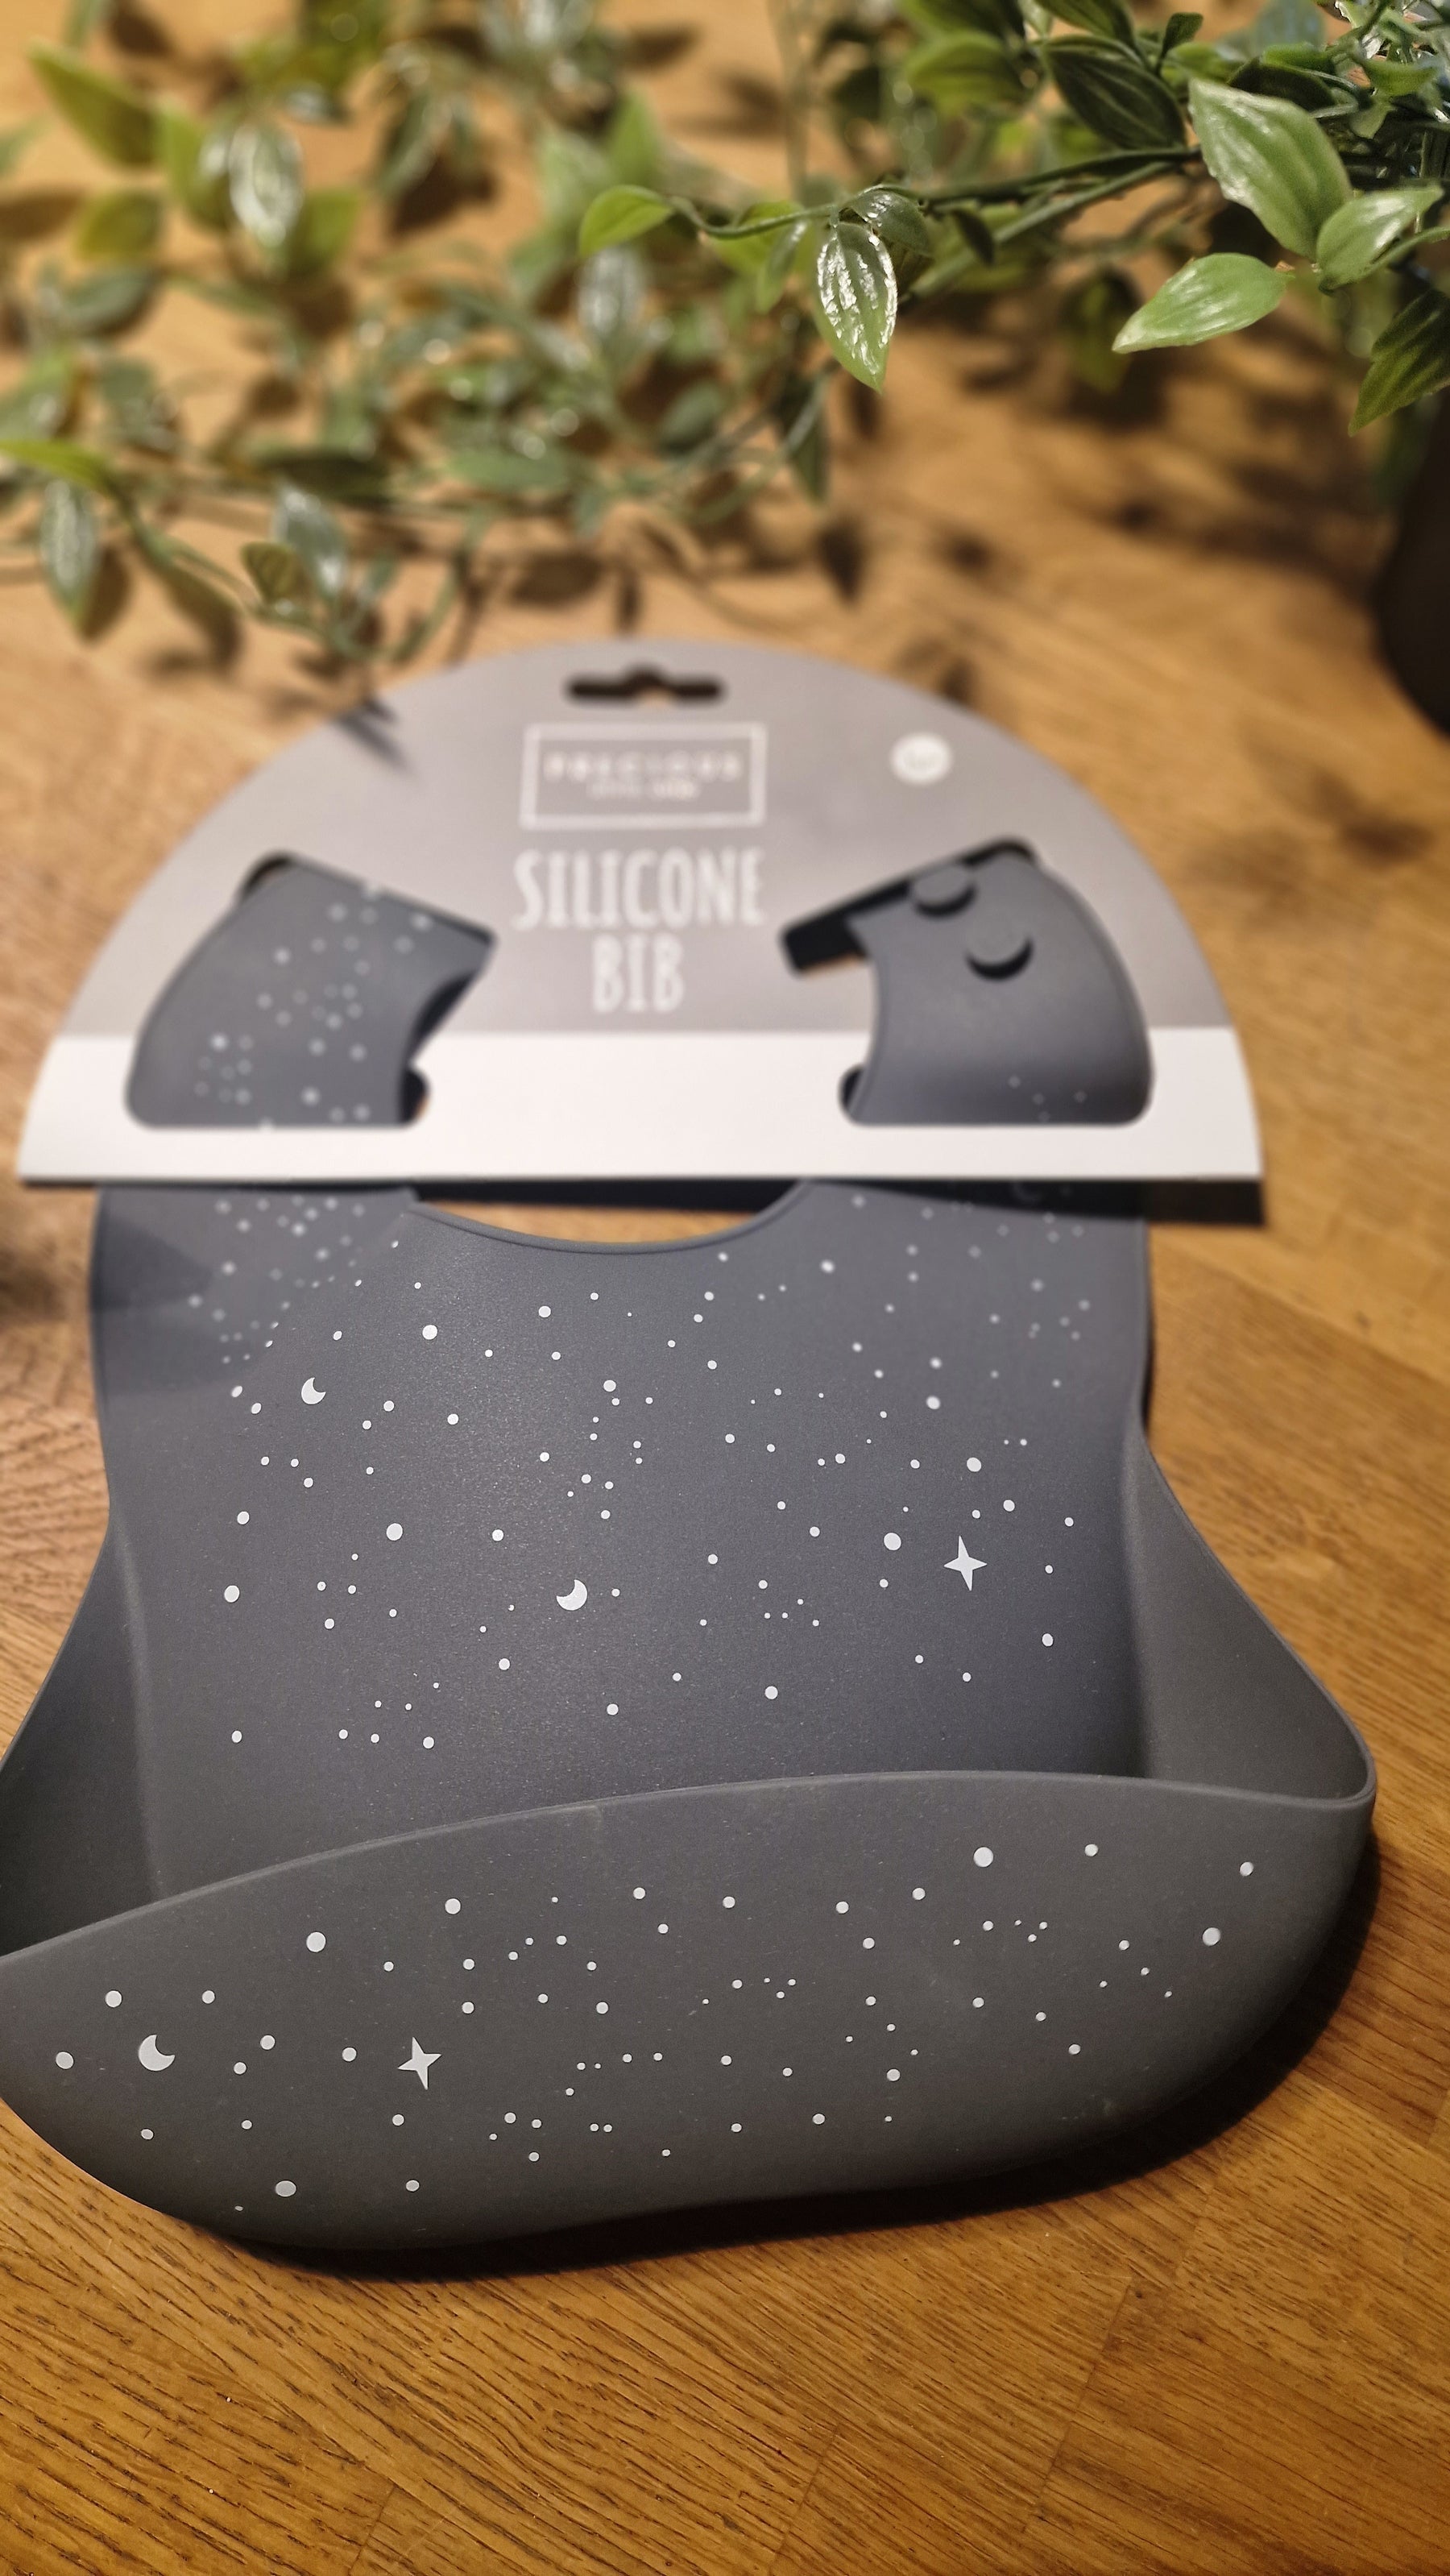 Precious Little One Silicone Bib Moons and Stars